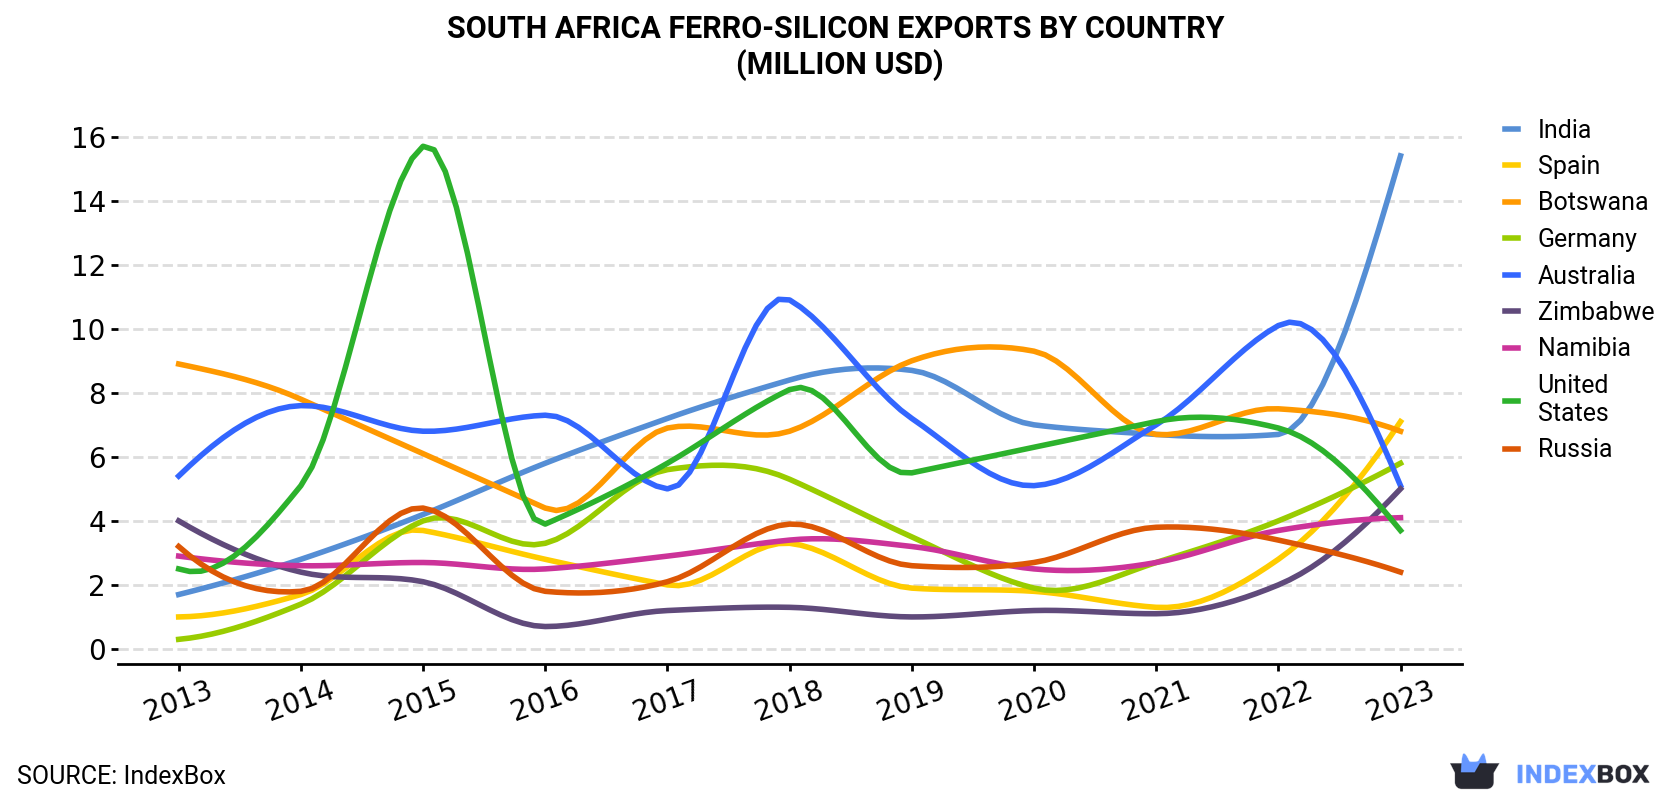 South Africa Ferro-Silicon Exports By Country (Million USD)